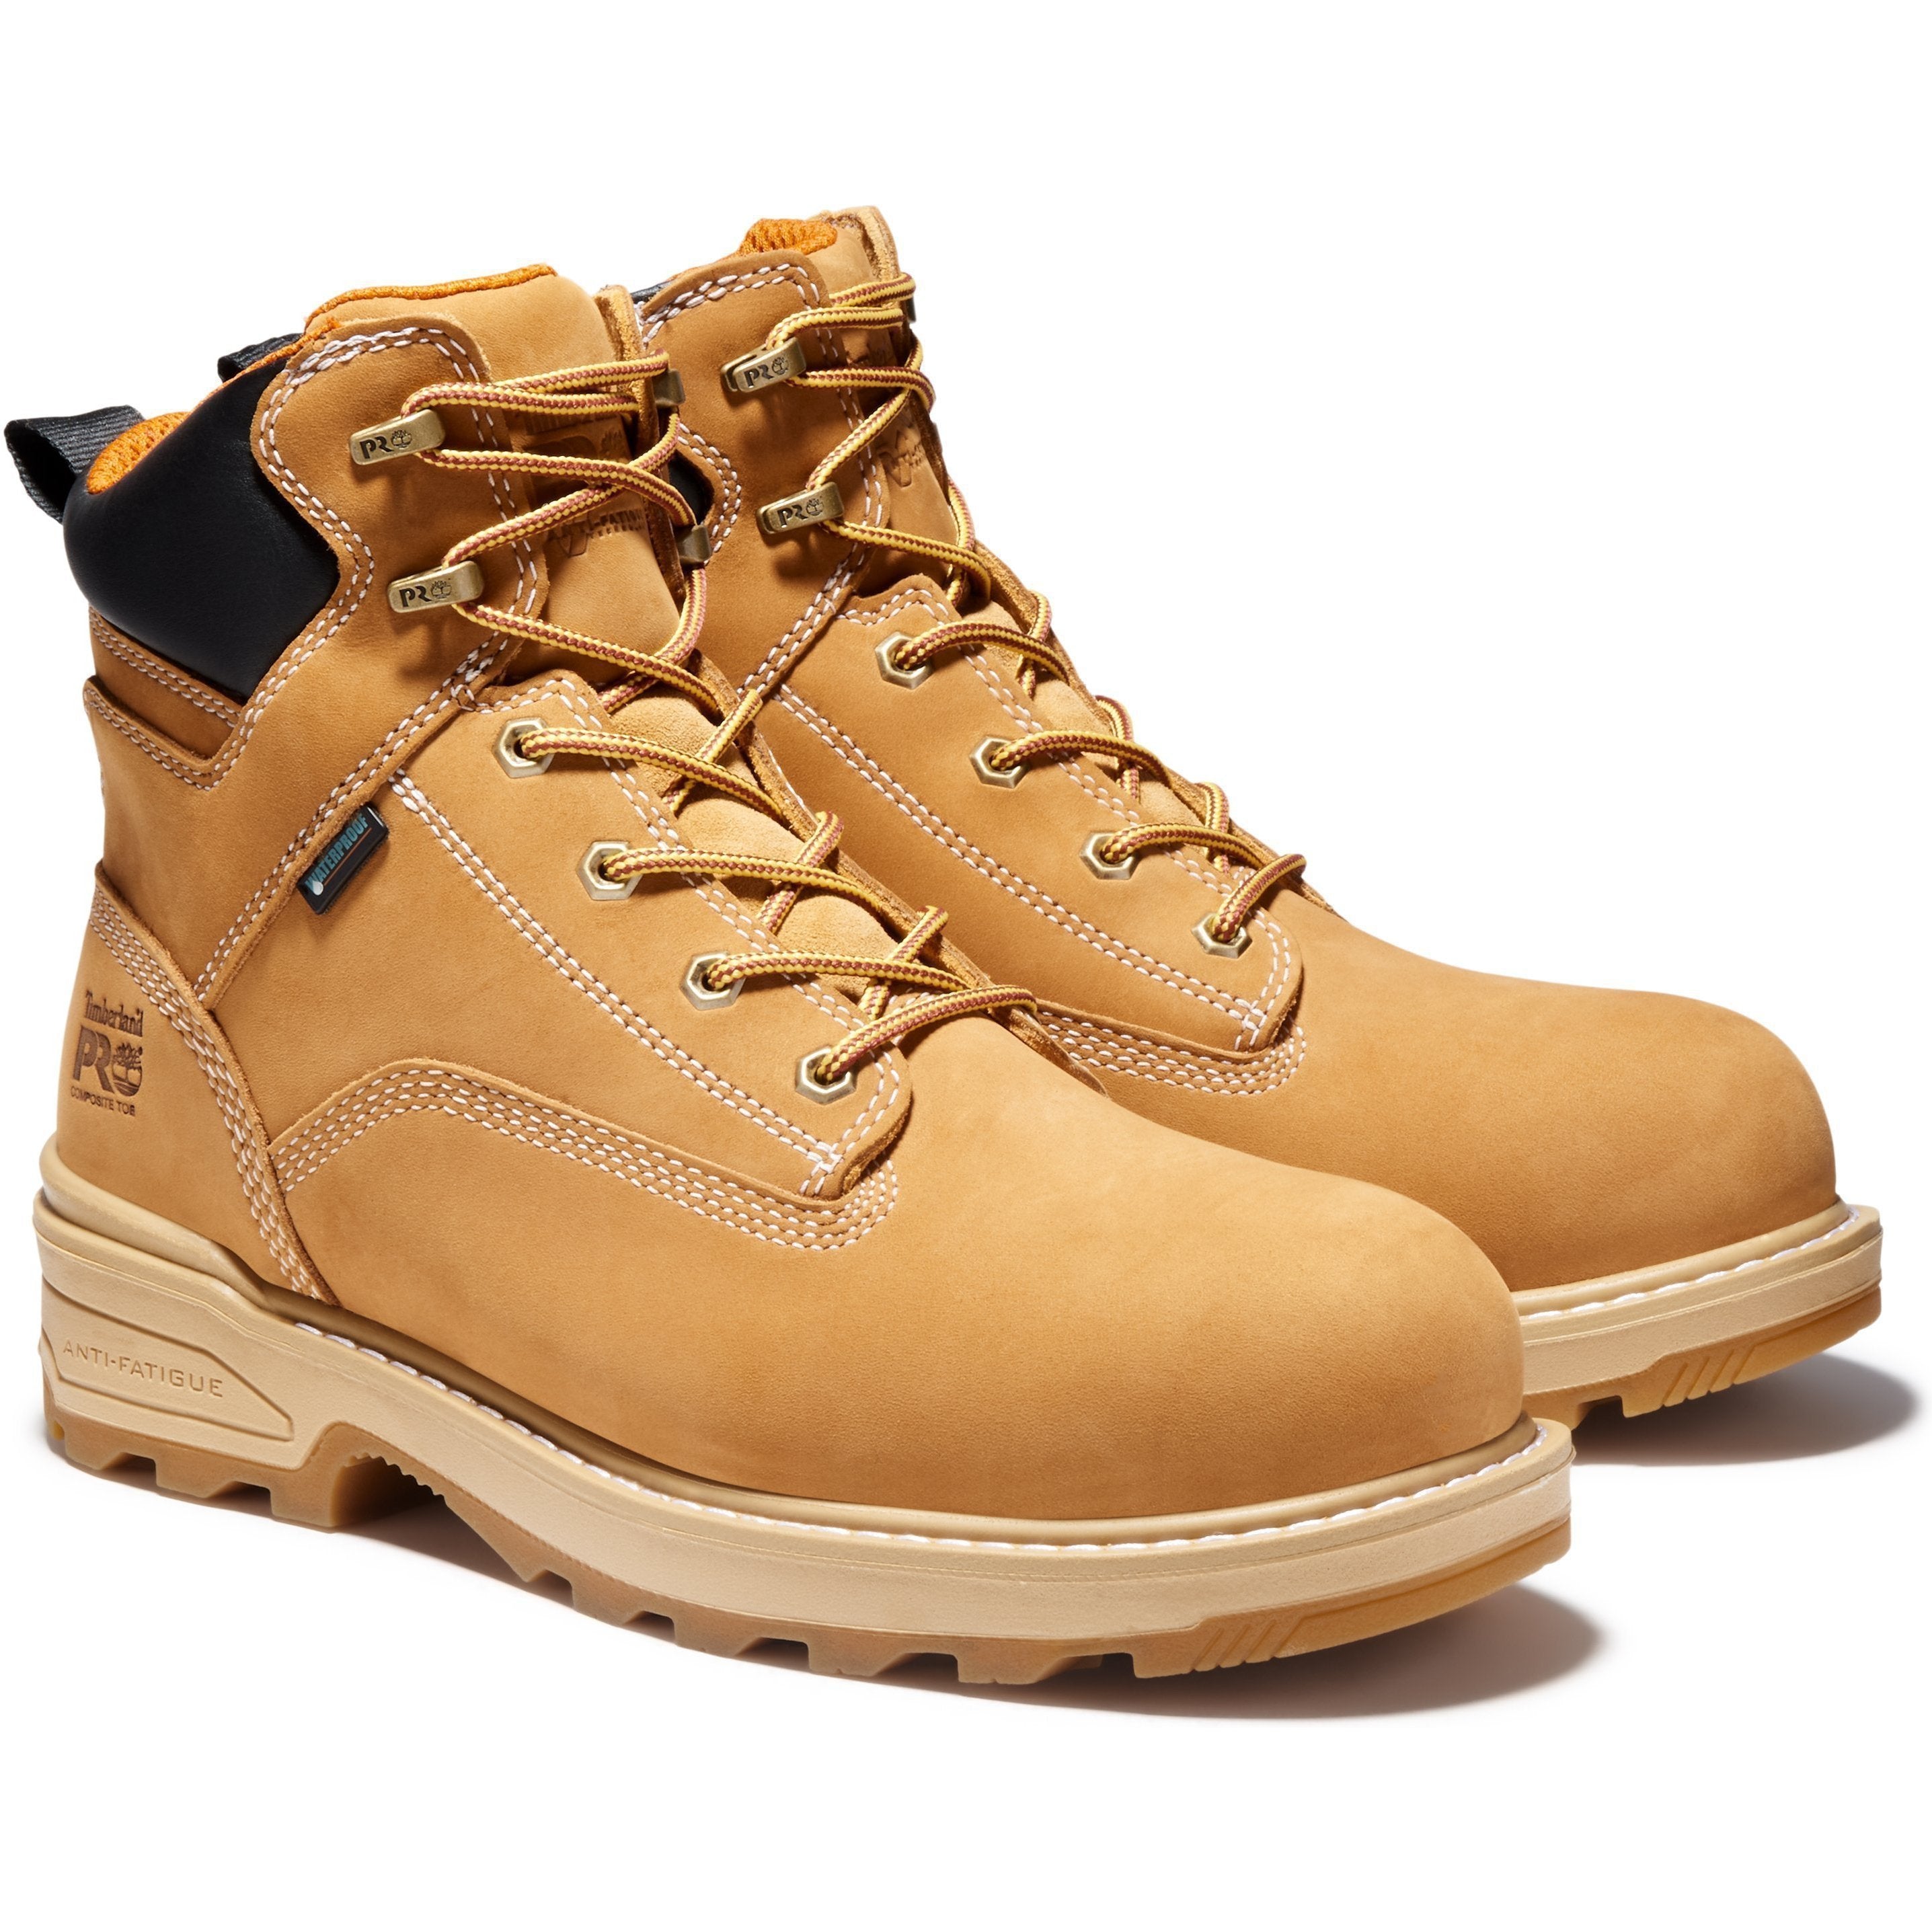 Timberland PRO Men's Resistor 6" Comp Toe WP Ins Work Boot TB0A121H231 7 / Medium / Wheat Tumbled Full Grain - Overlook Boots